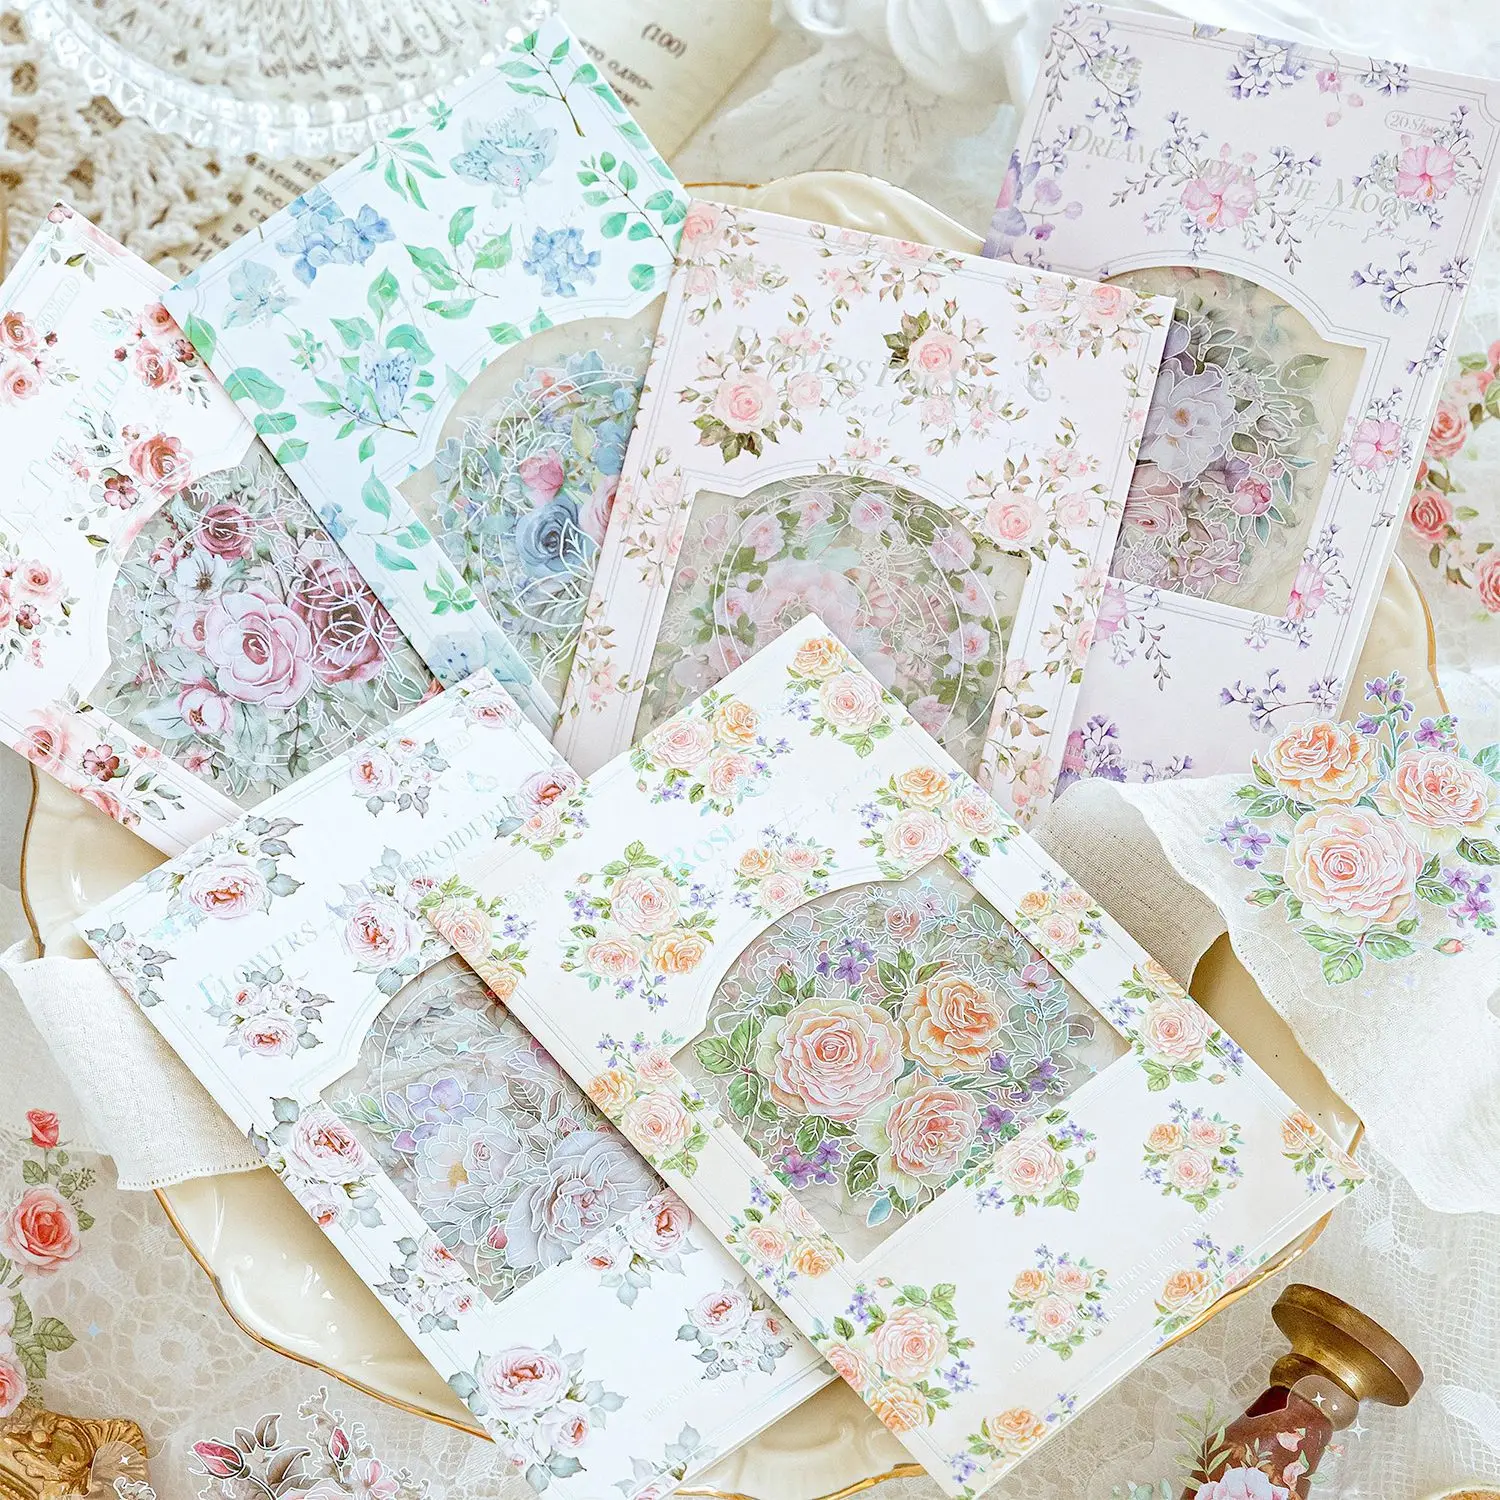 

20sets/lot Kawaii Stationery Stickers French Fresh Flowers Junk Journal Diary Planner Decorative Mobile Sticker Scrapbooking